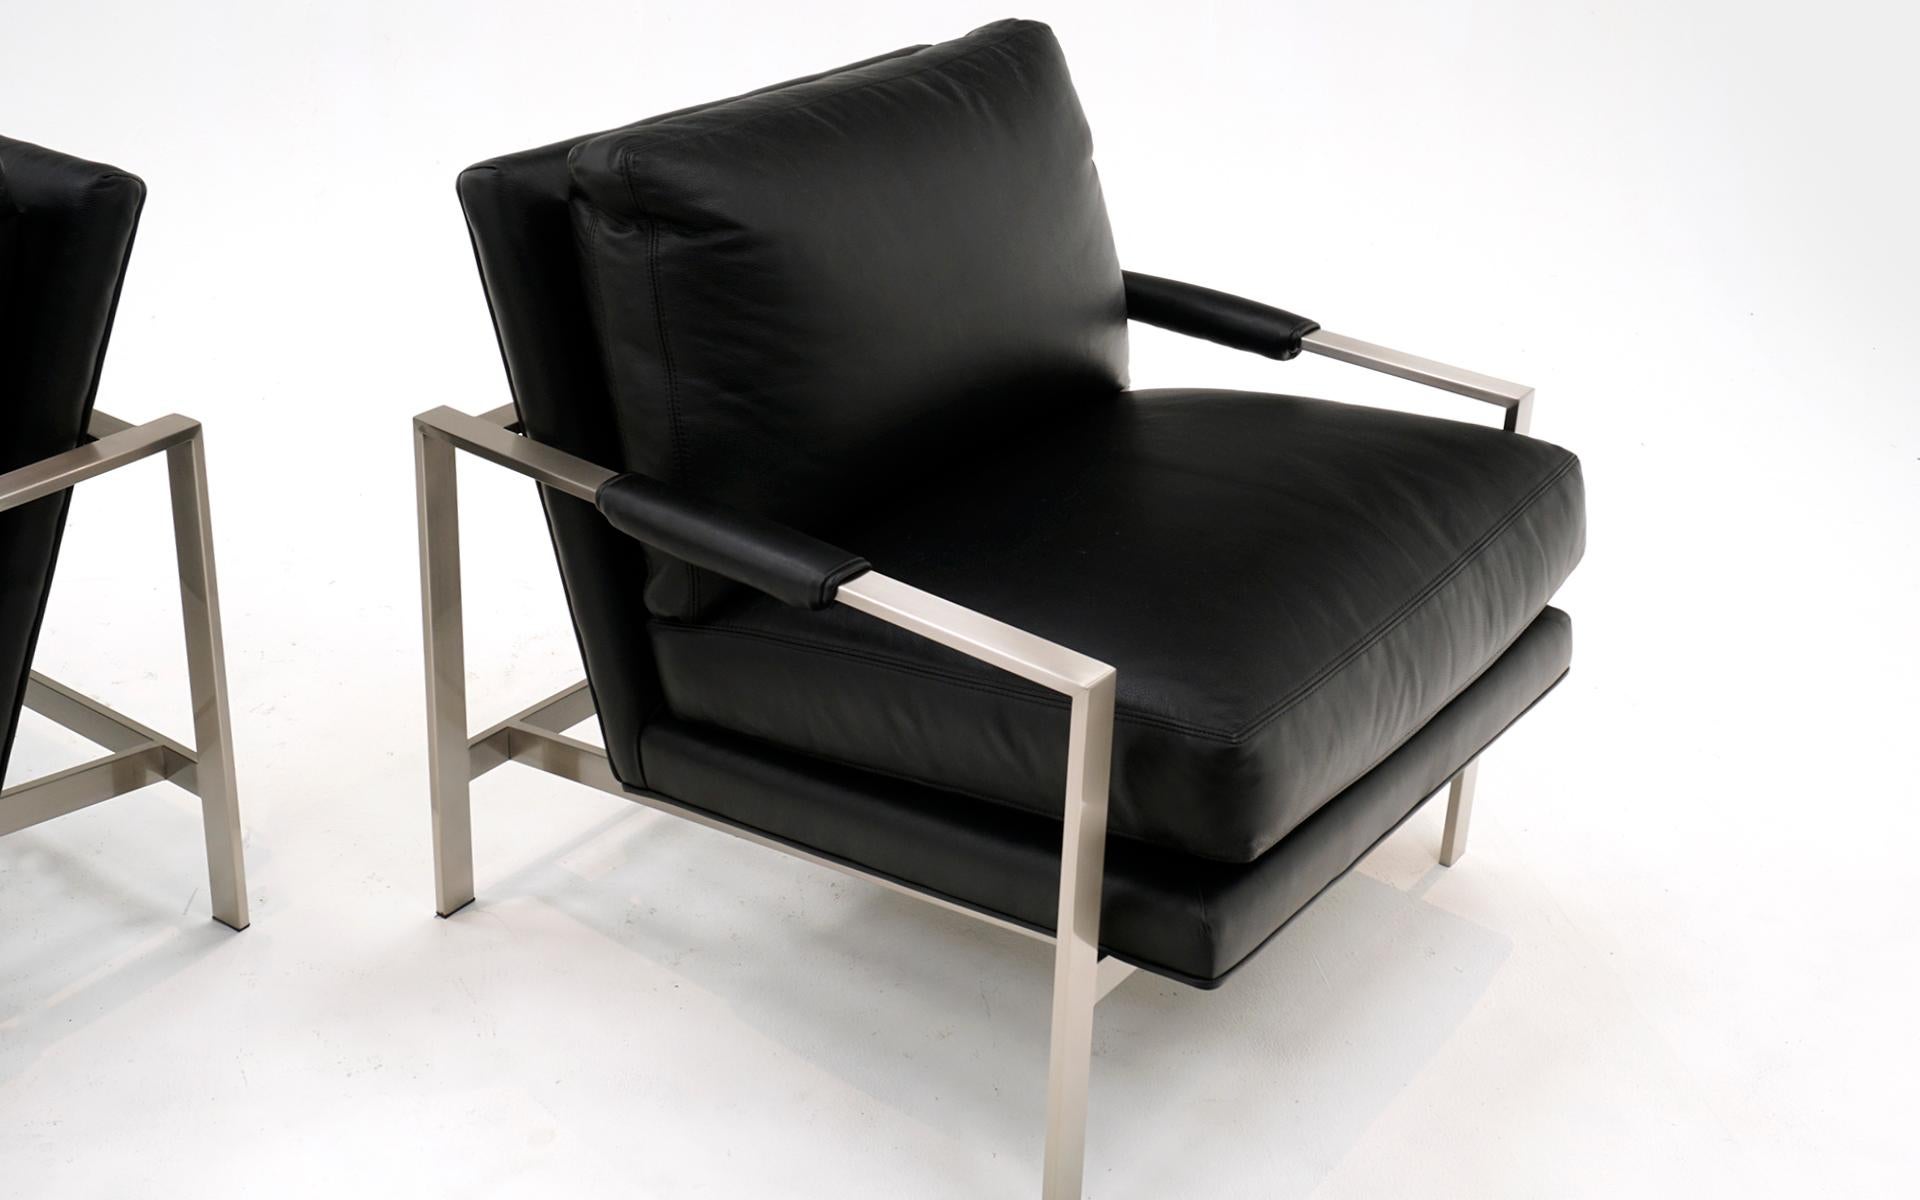 Pair of Milo Baughman Black Leather & Brushed Steel Lounge Chairs. Signed 1